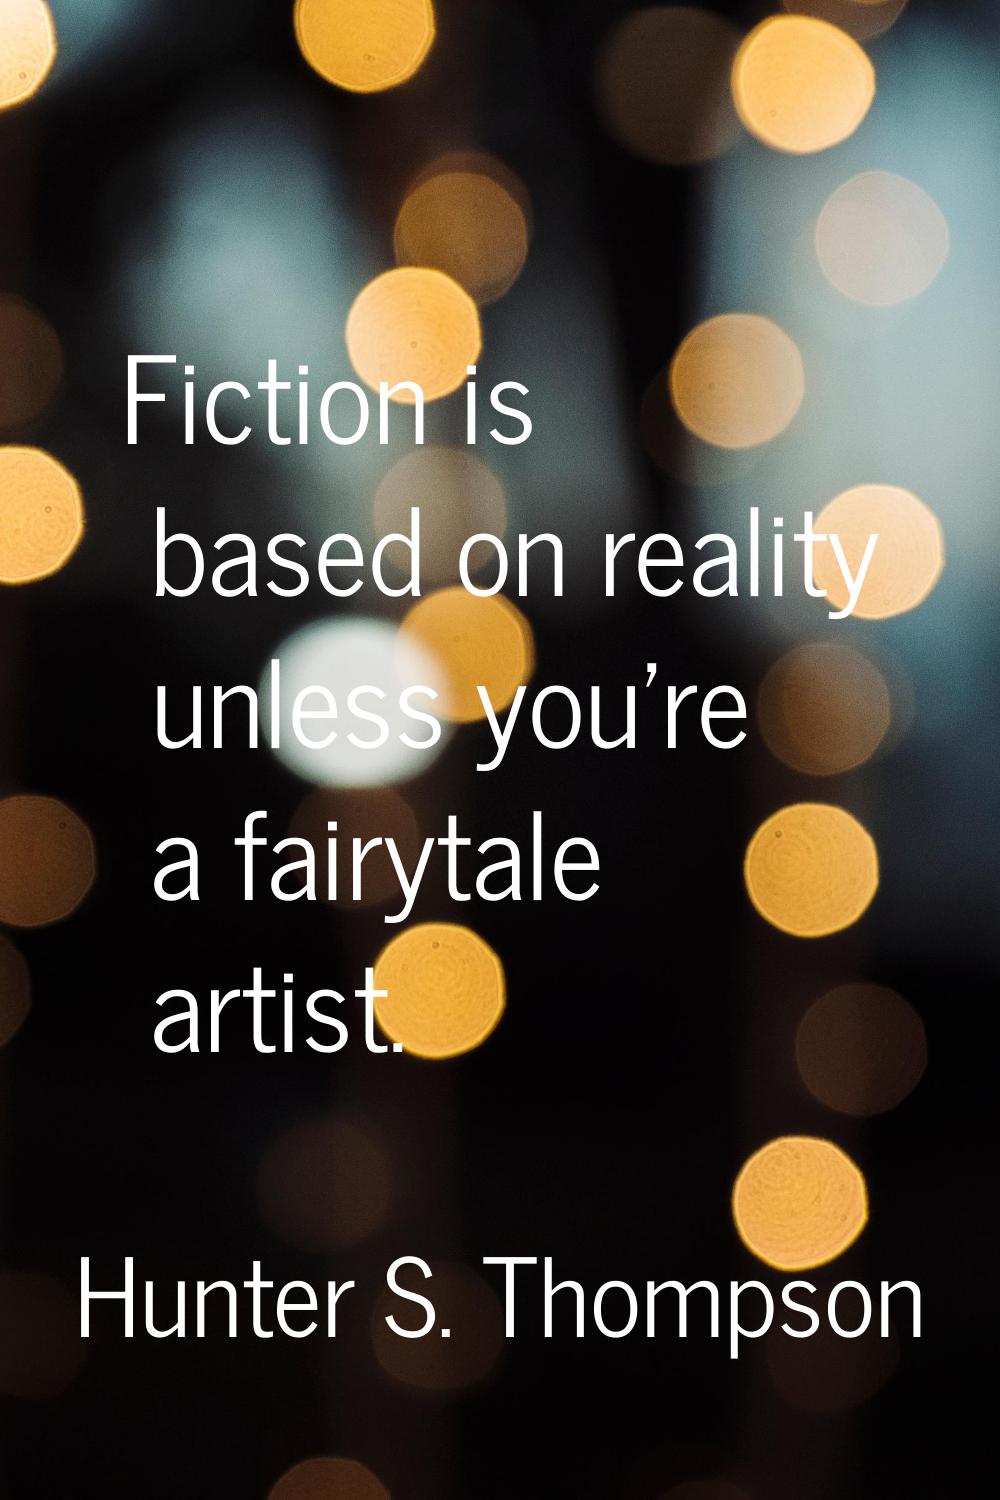 Fiction is based on reality unless you're a fairytale artist.